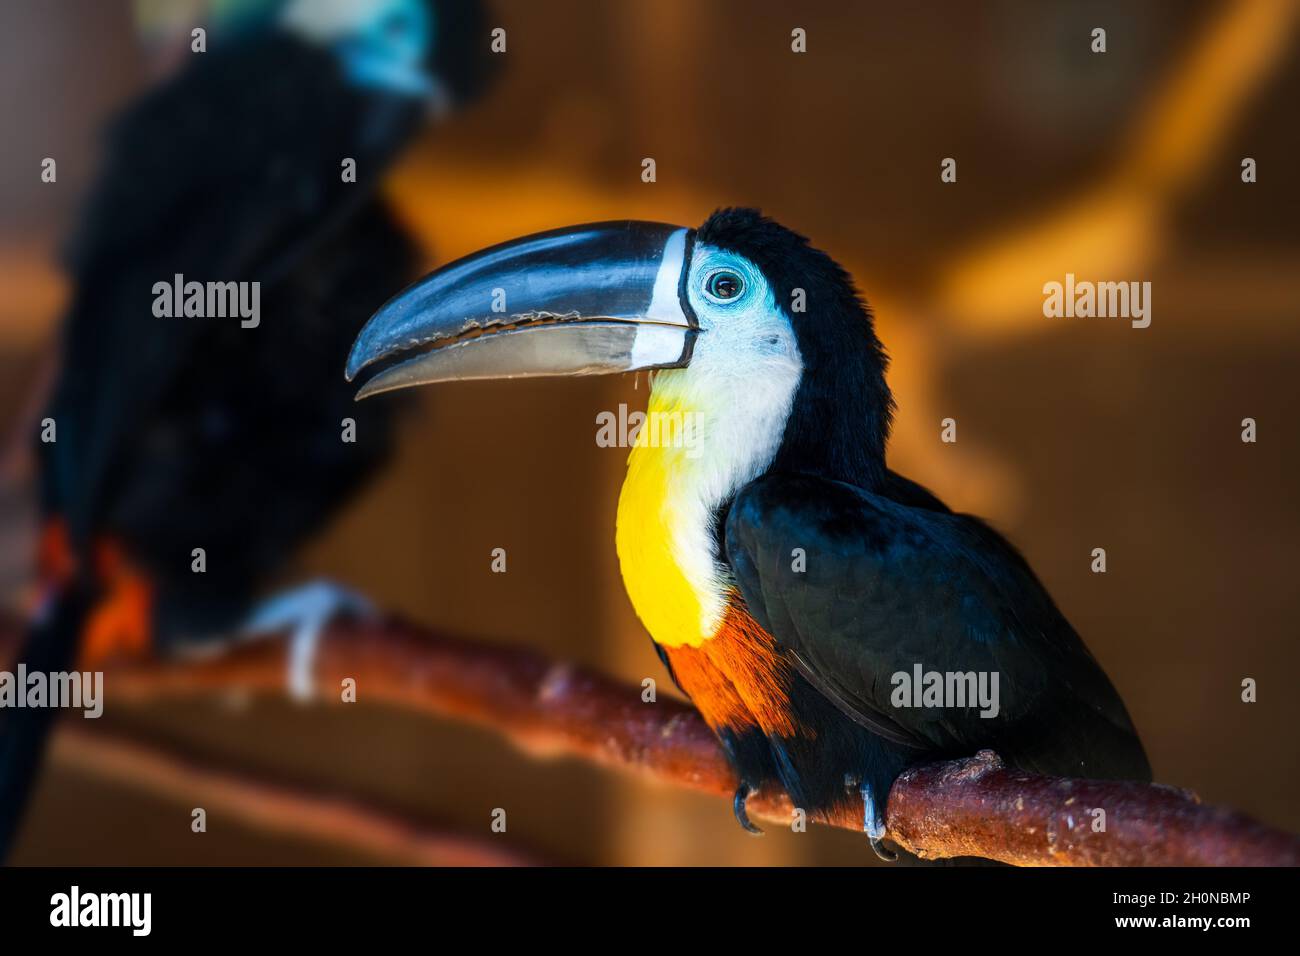 Toucan bird with big black nose or beak sitting on branch in forest. Stock Photo